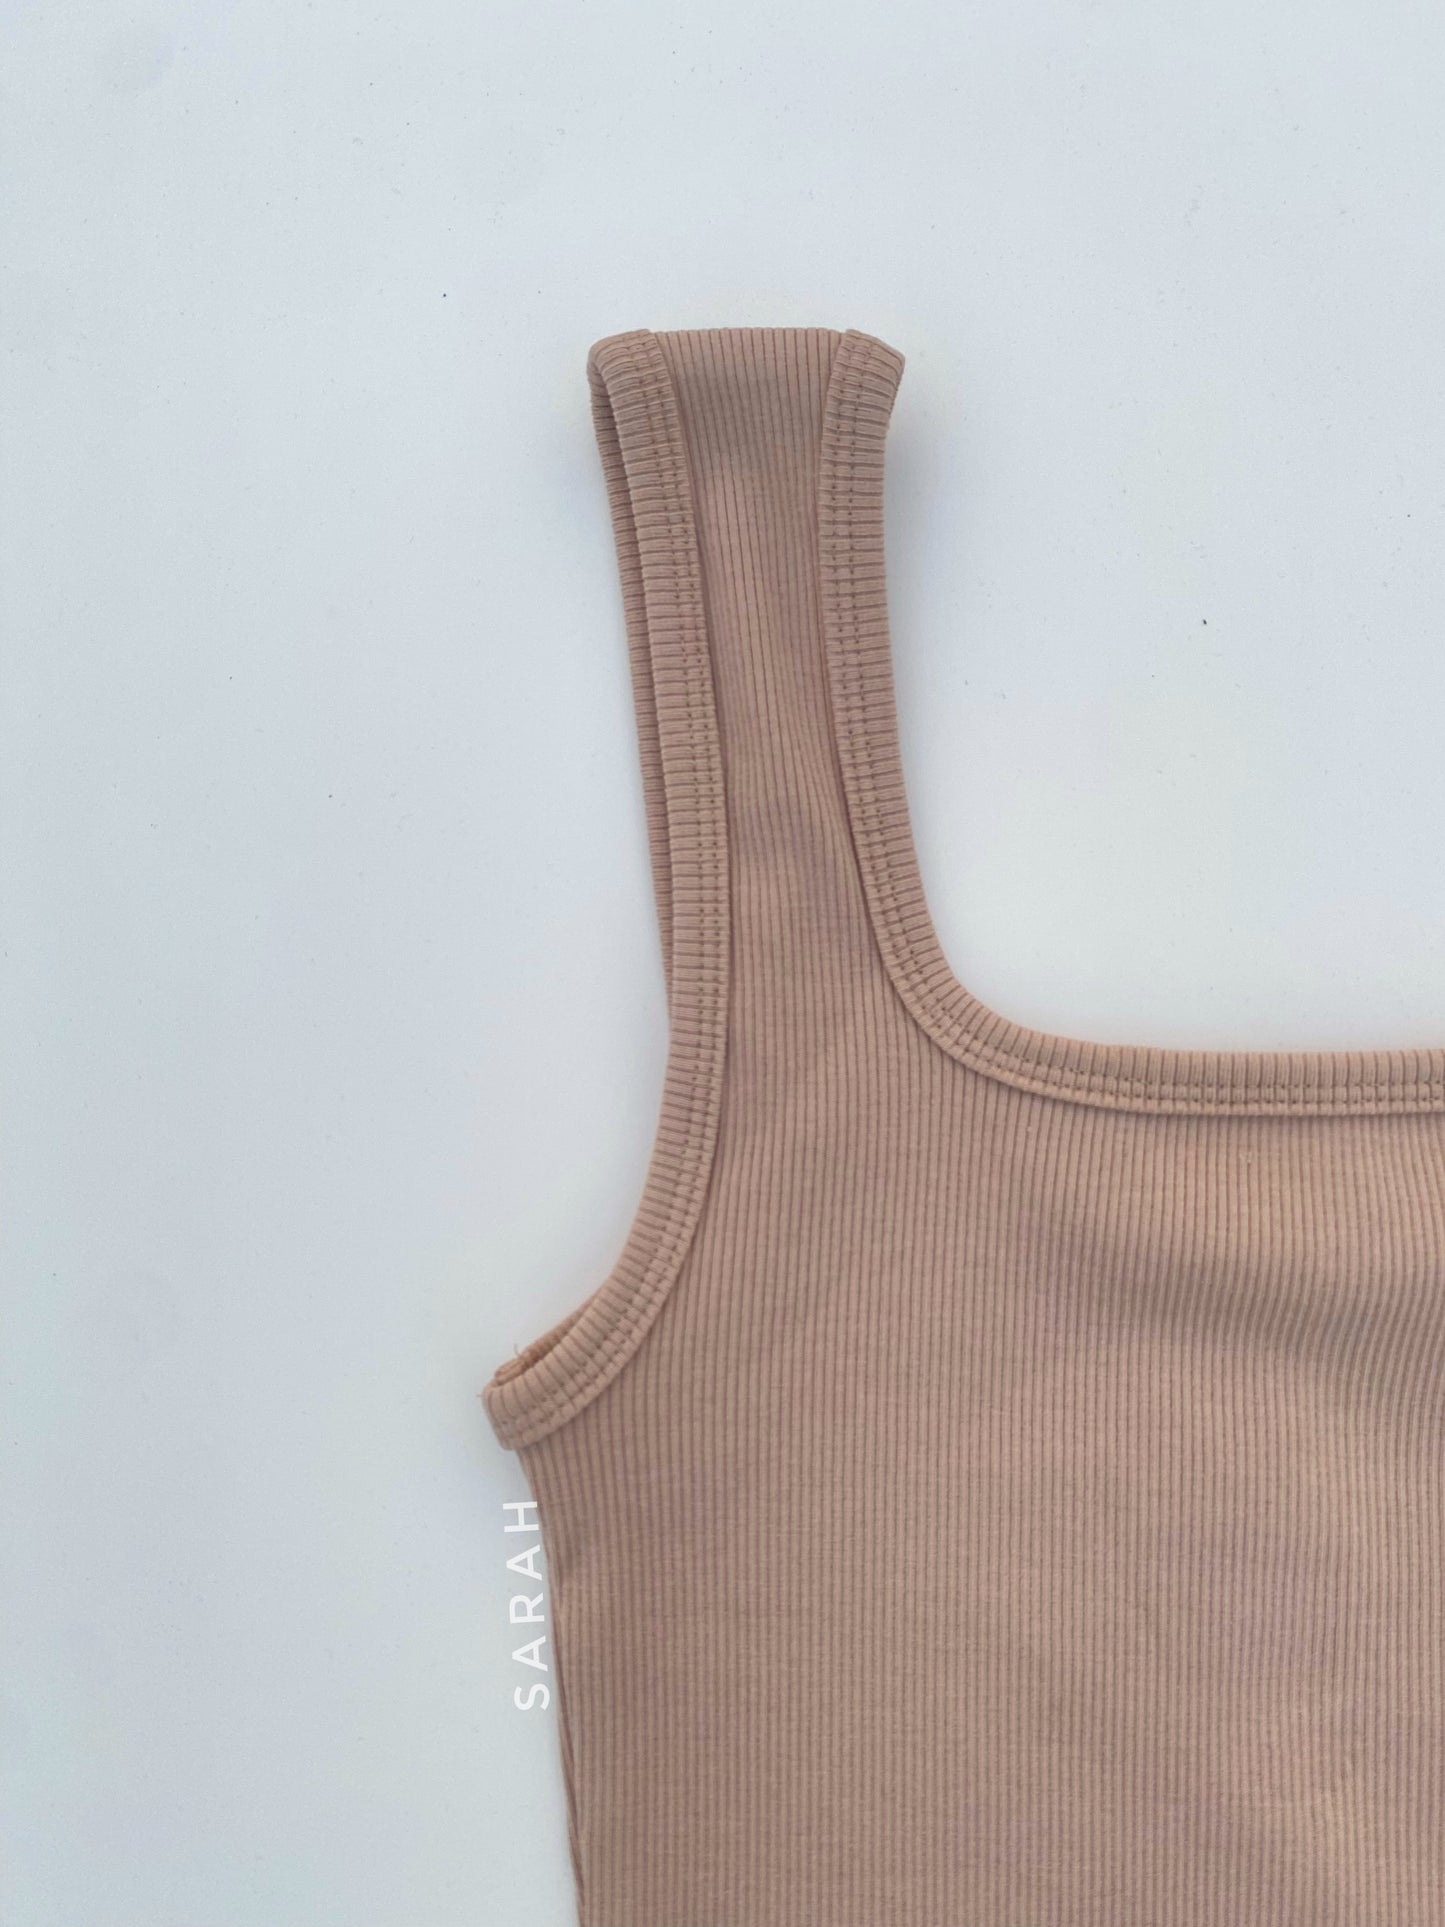 Beige Color Square Neck Sleeveless Tank Top